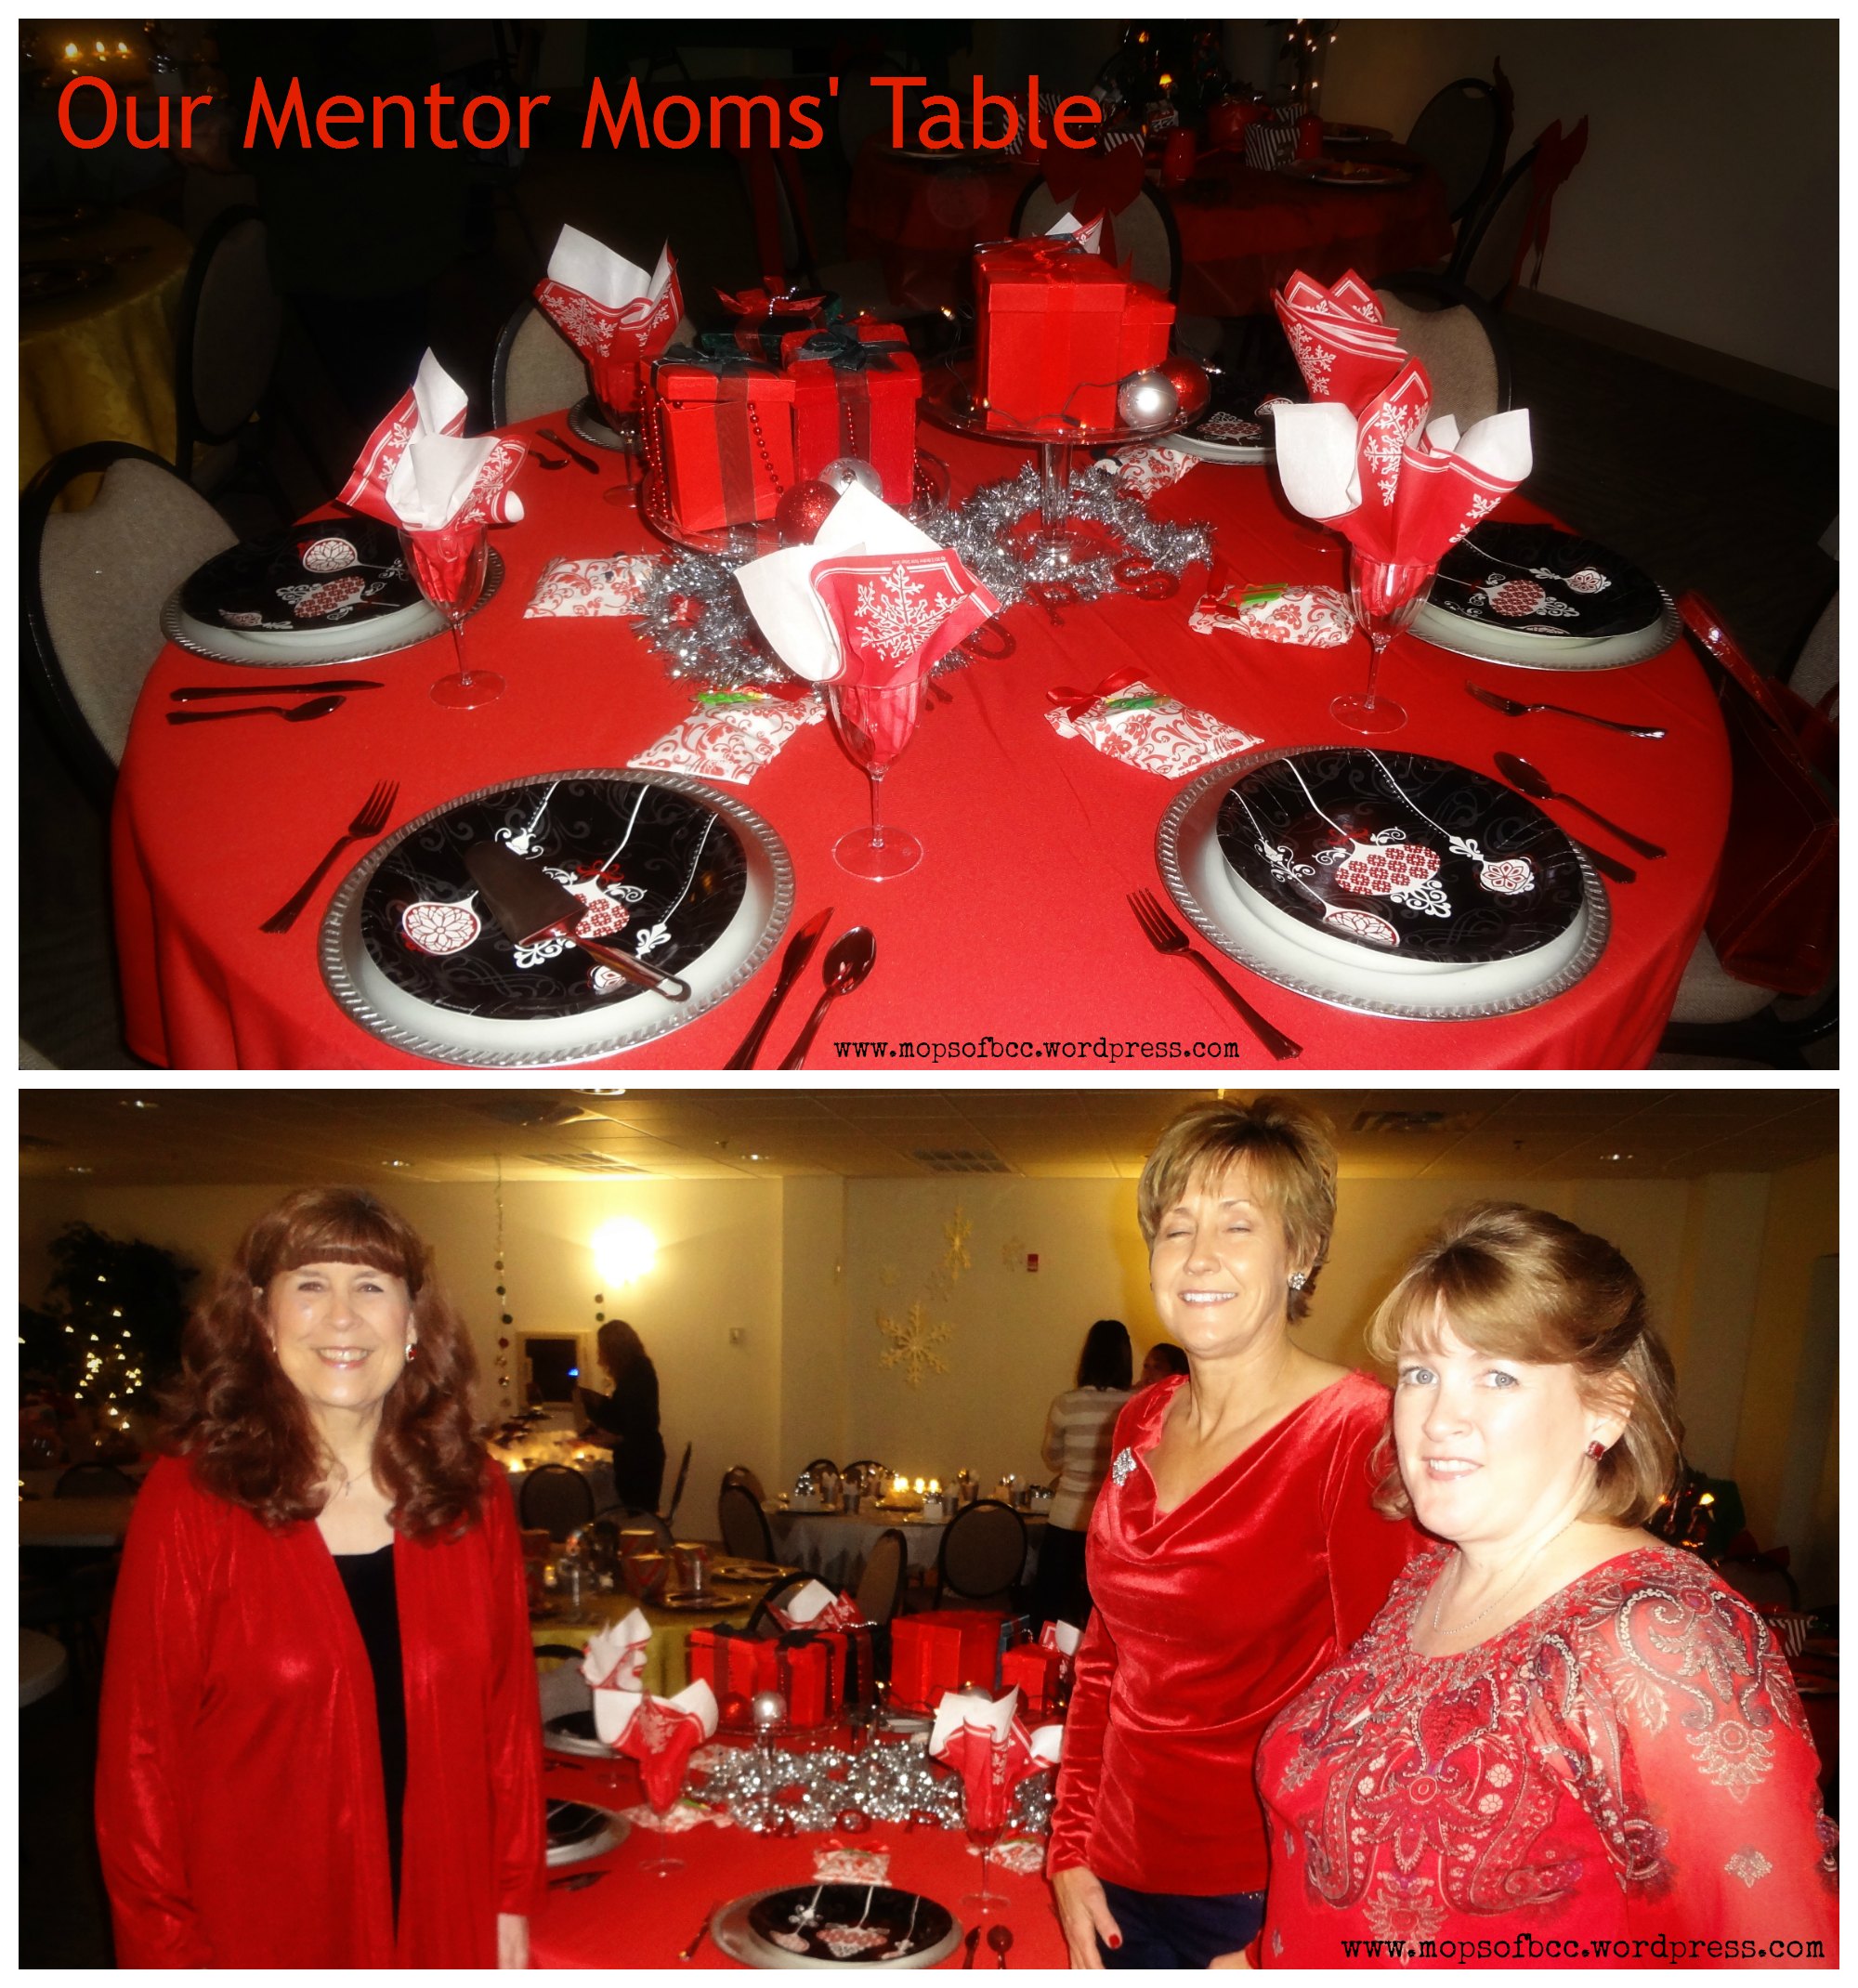 Our Mentor Moms Teen Moms 35